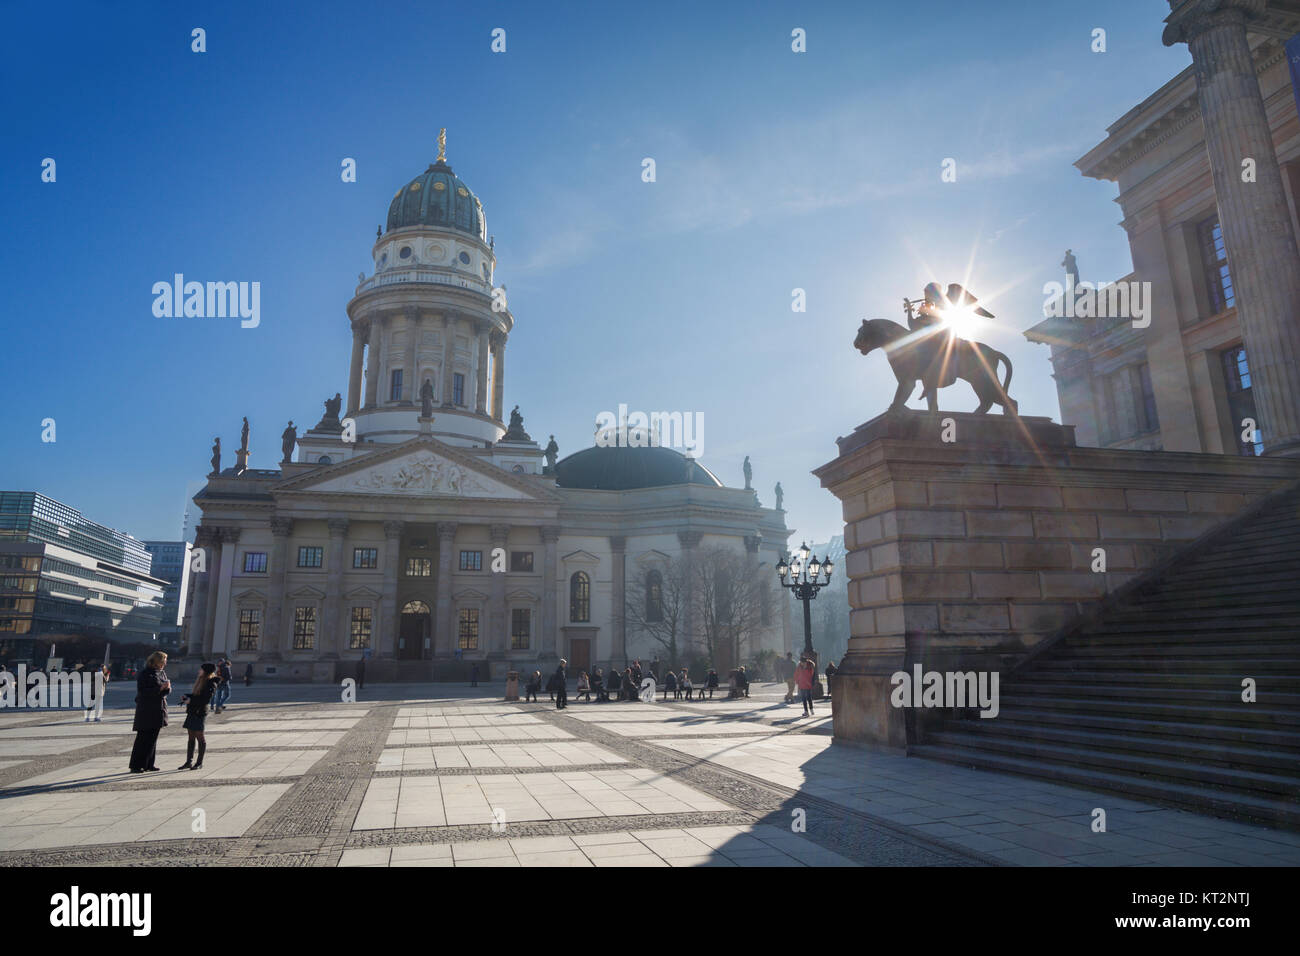 BERLIN, GERMANY, FEBRUARY - 14, 2017: The Konzerthaus building and the German Dom on the Gendarmenmarkt square. Stock Photo